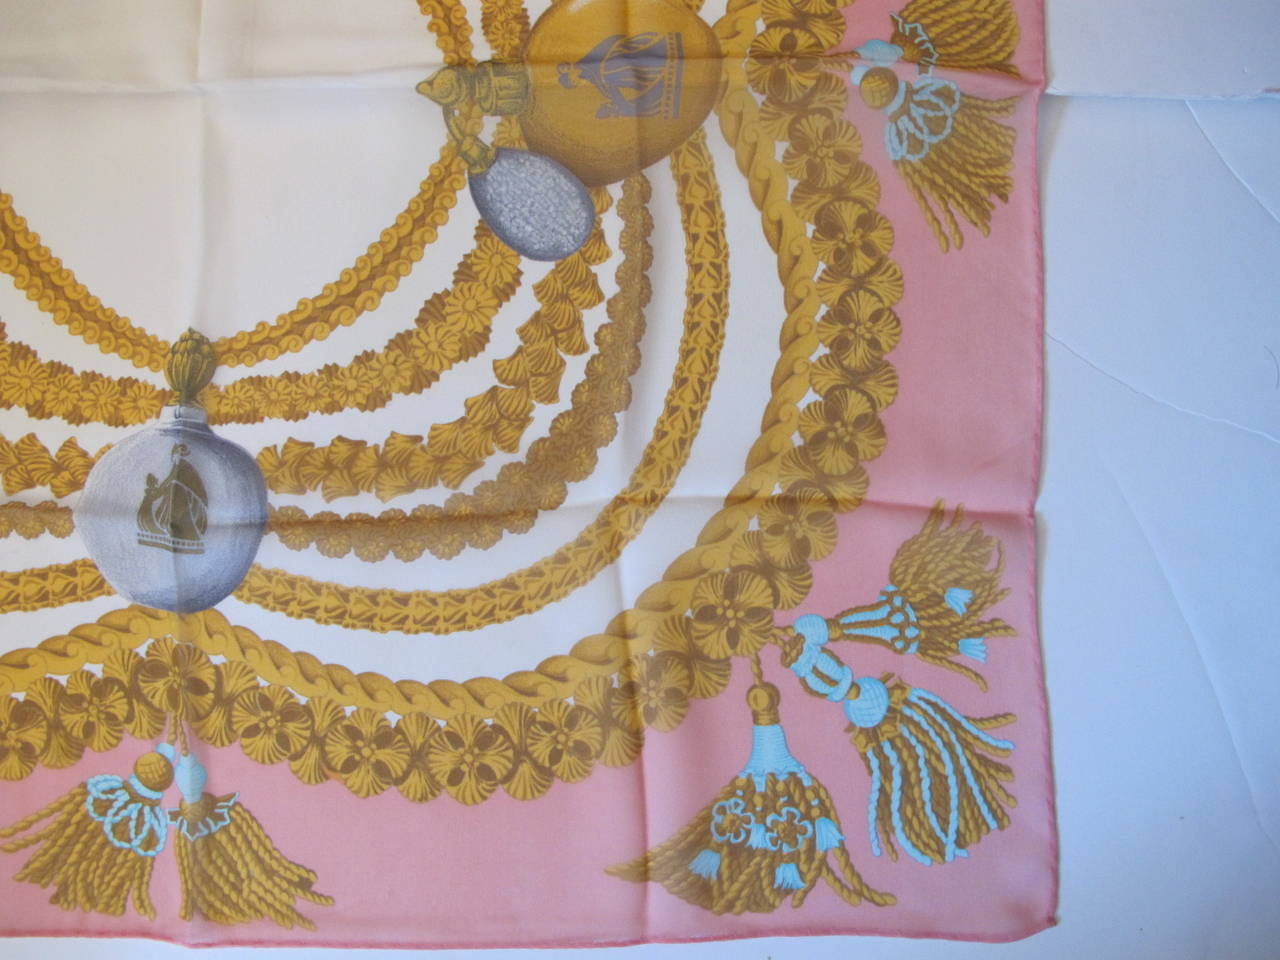 1960's Vintage Lanvin Scarf with Perfume Bottles and Tassels In New Condition For Sale In San Francisco, CA